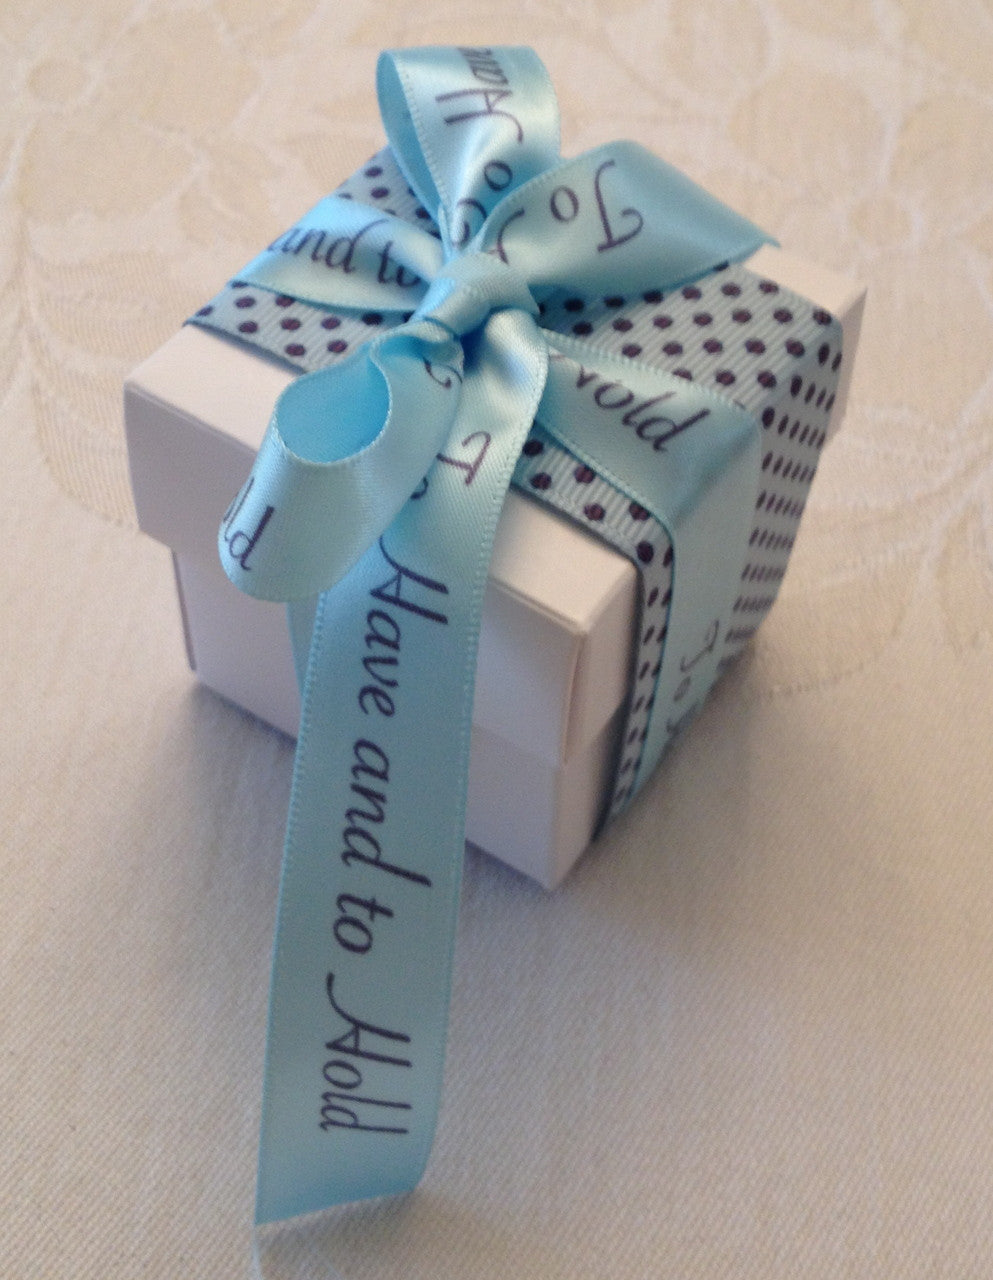 Our pin dot grosgrain looks so handsome with our satin To Have and To Hold ribbon. Such a beautiful vow to share with your guests on your favor boxes.